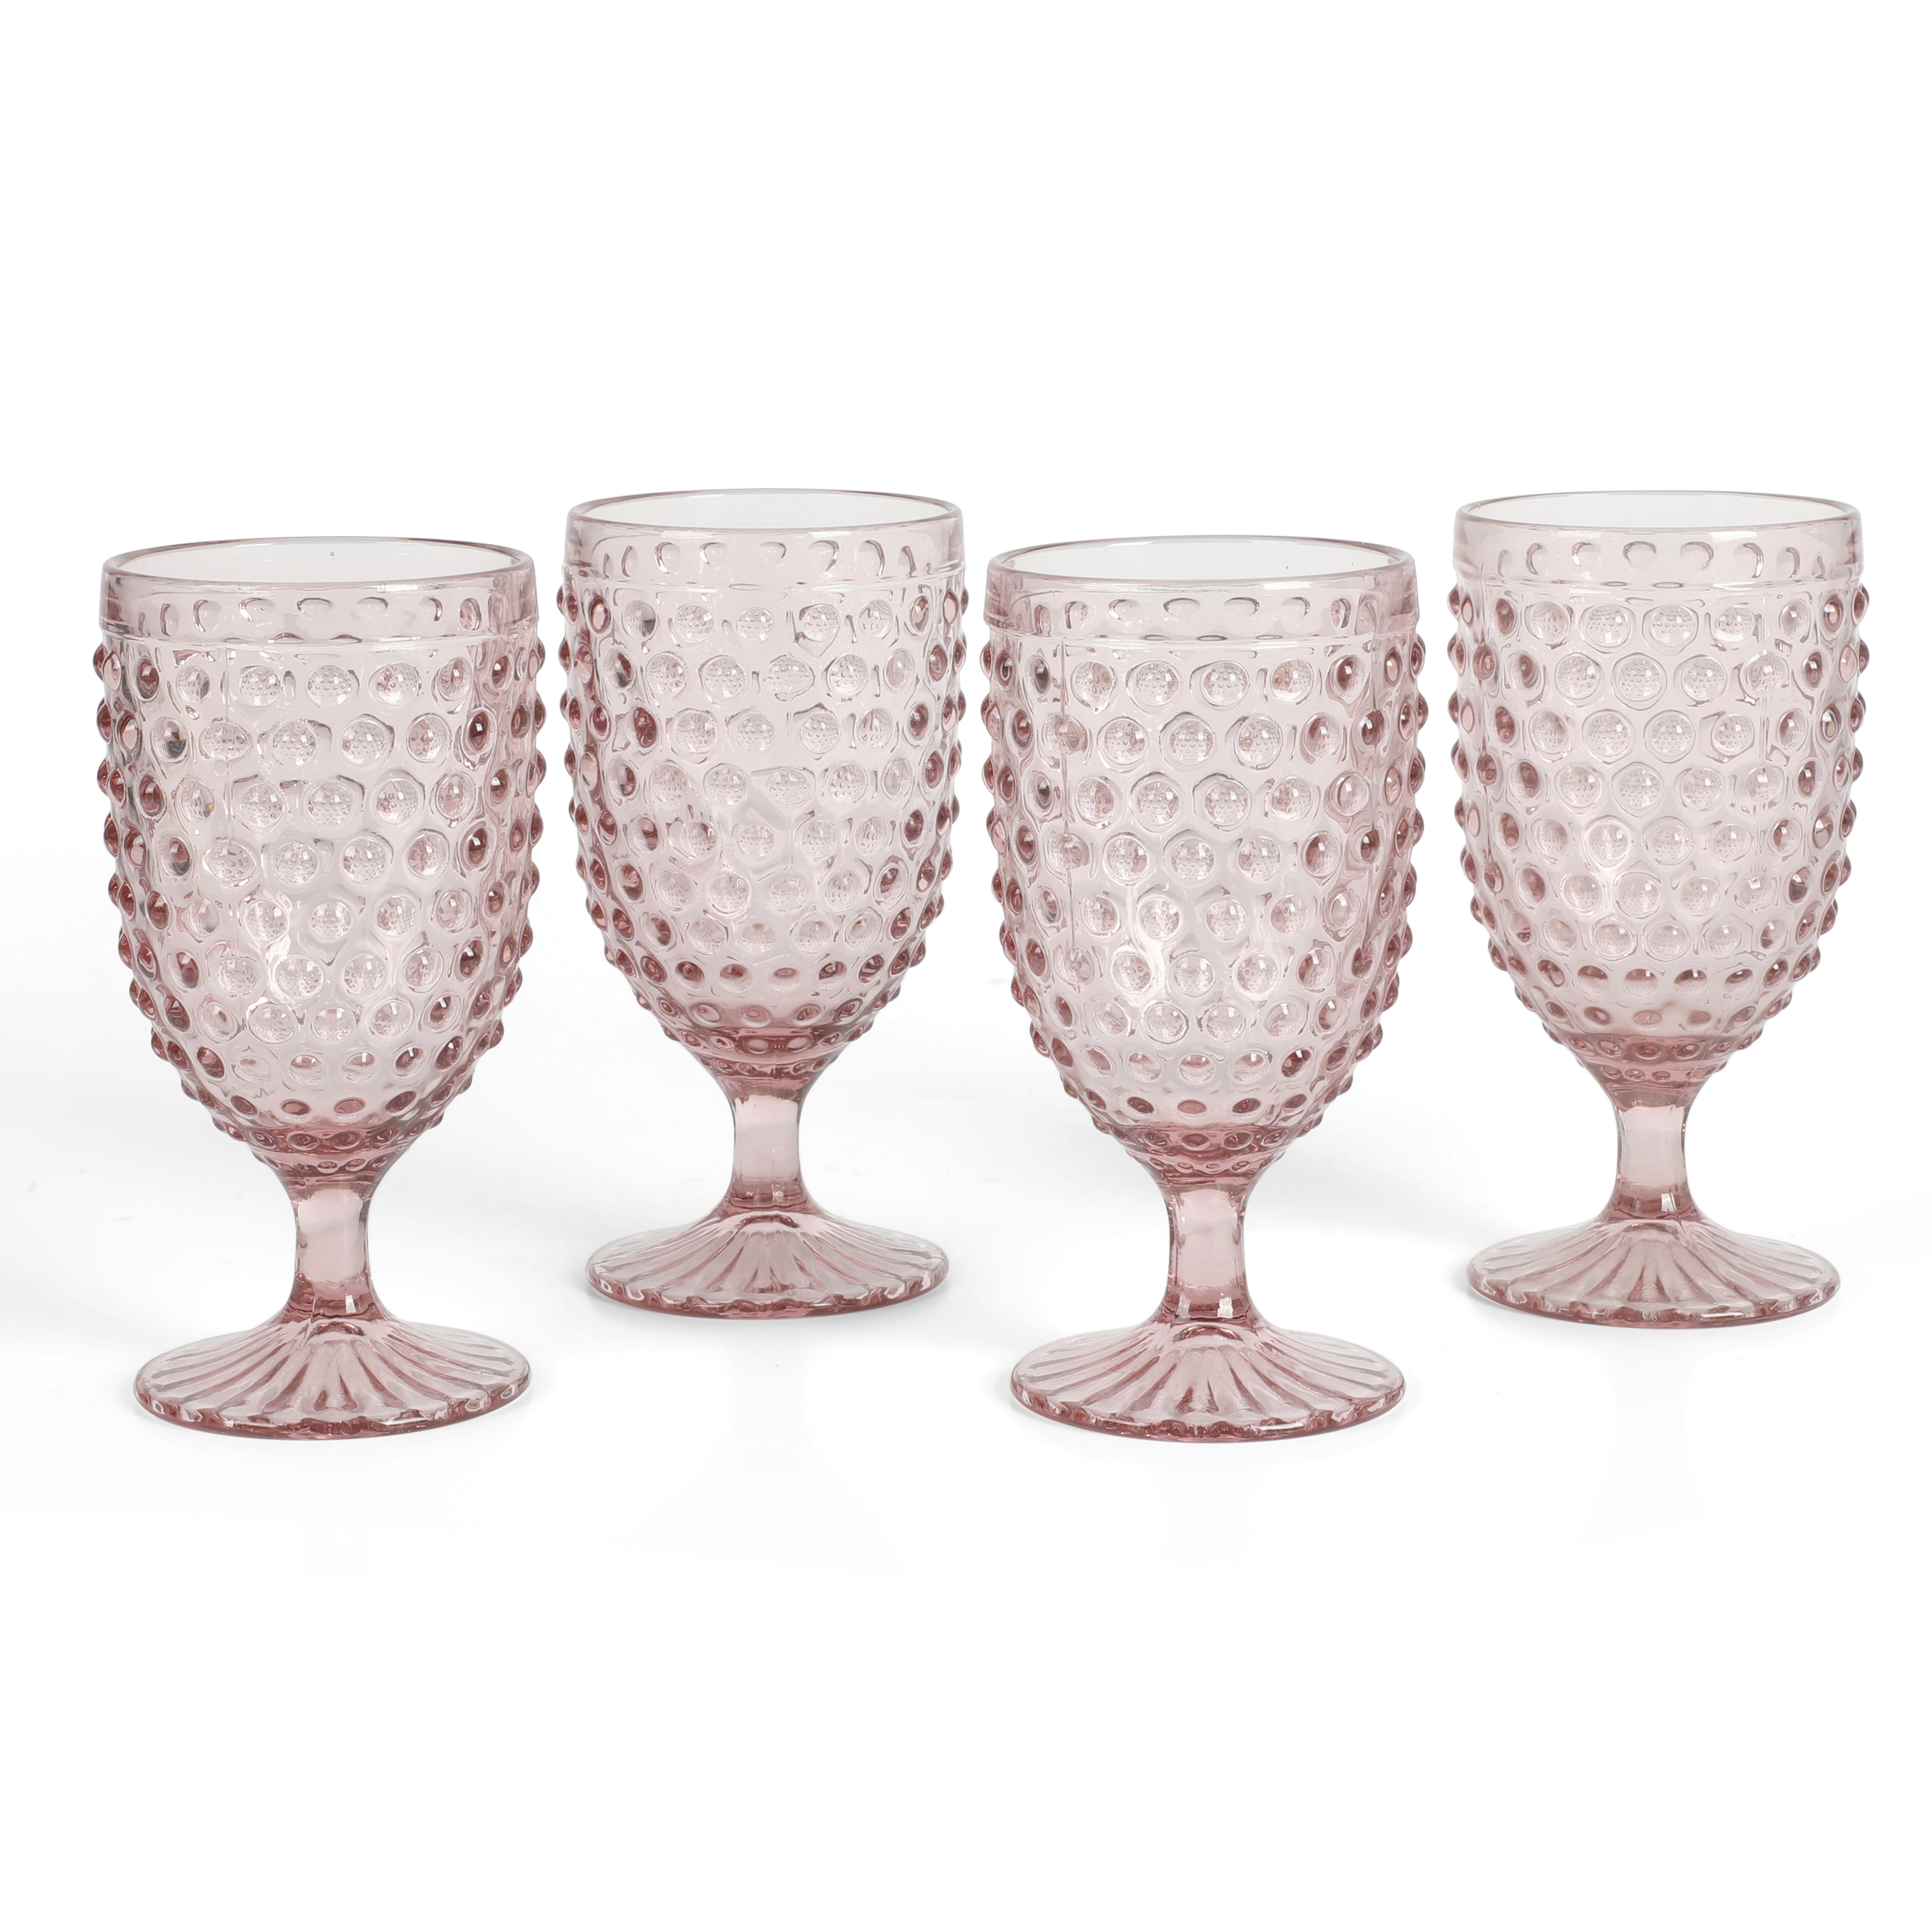 Martha Stewart Collection 12-Pc. Red Wine Glasses Set, Created for